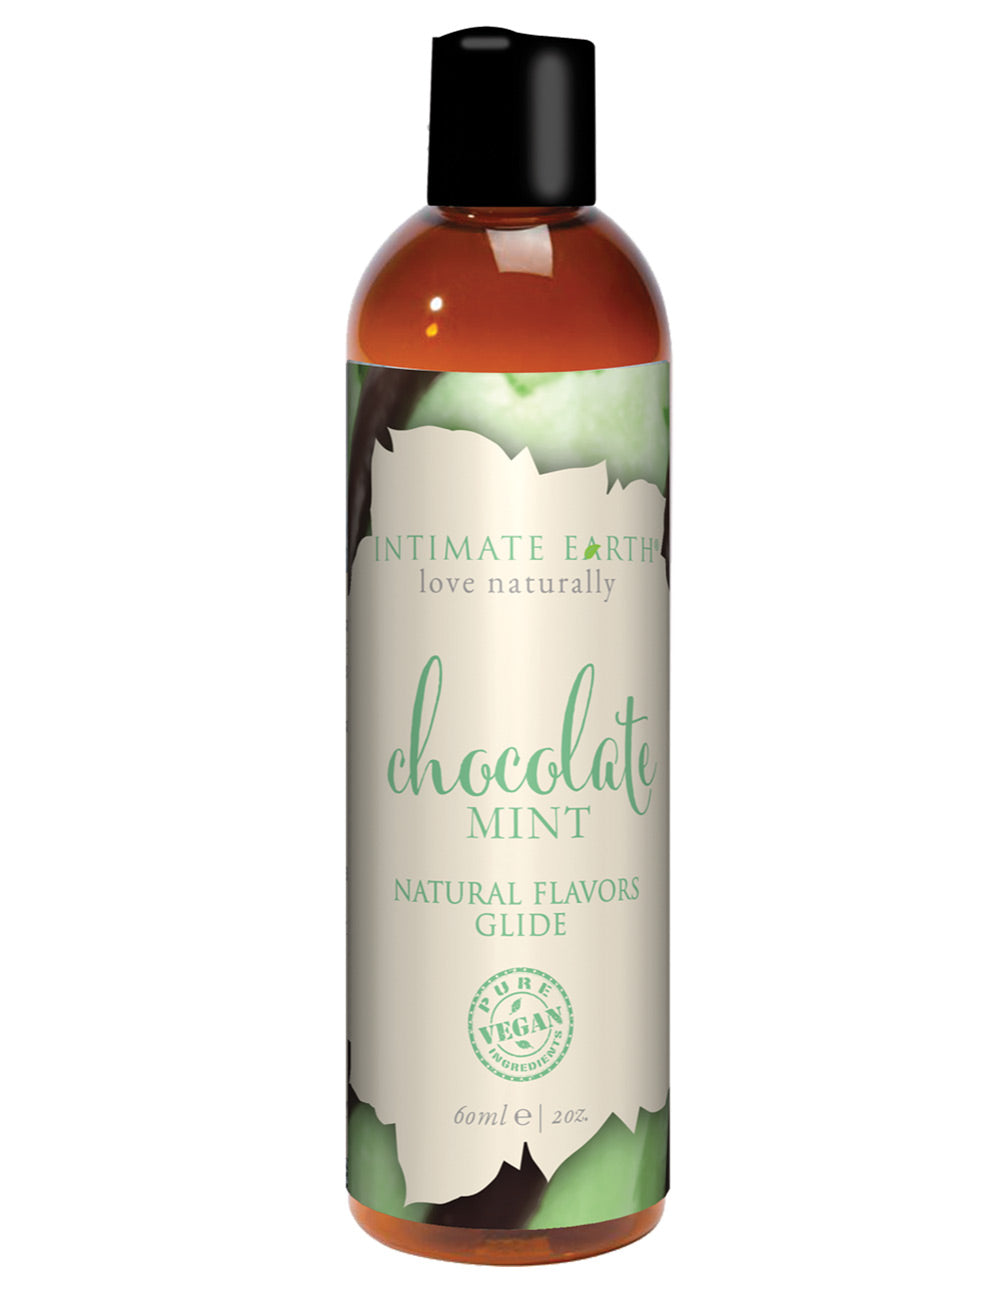 Intimate Earth Natural Flavors Glide | Chocolate Mint 60ml